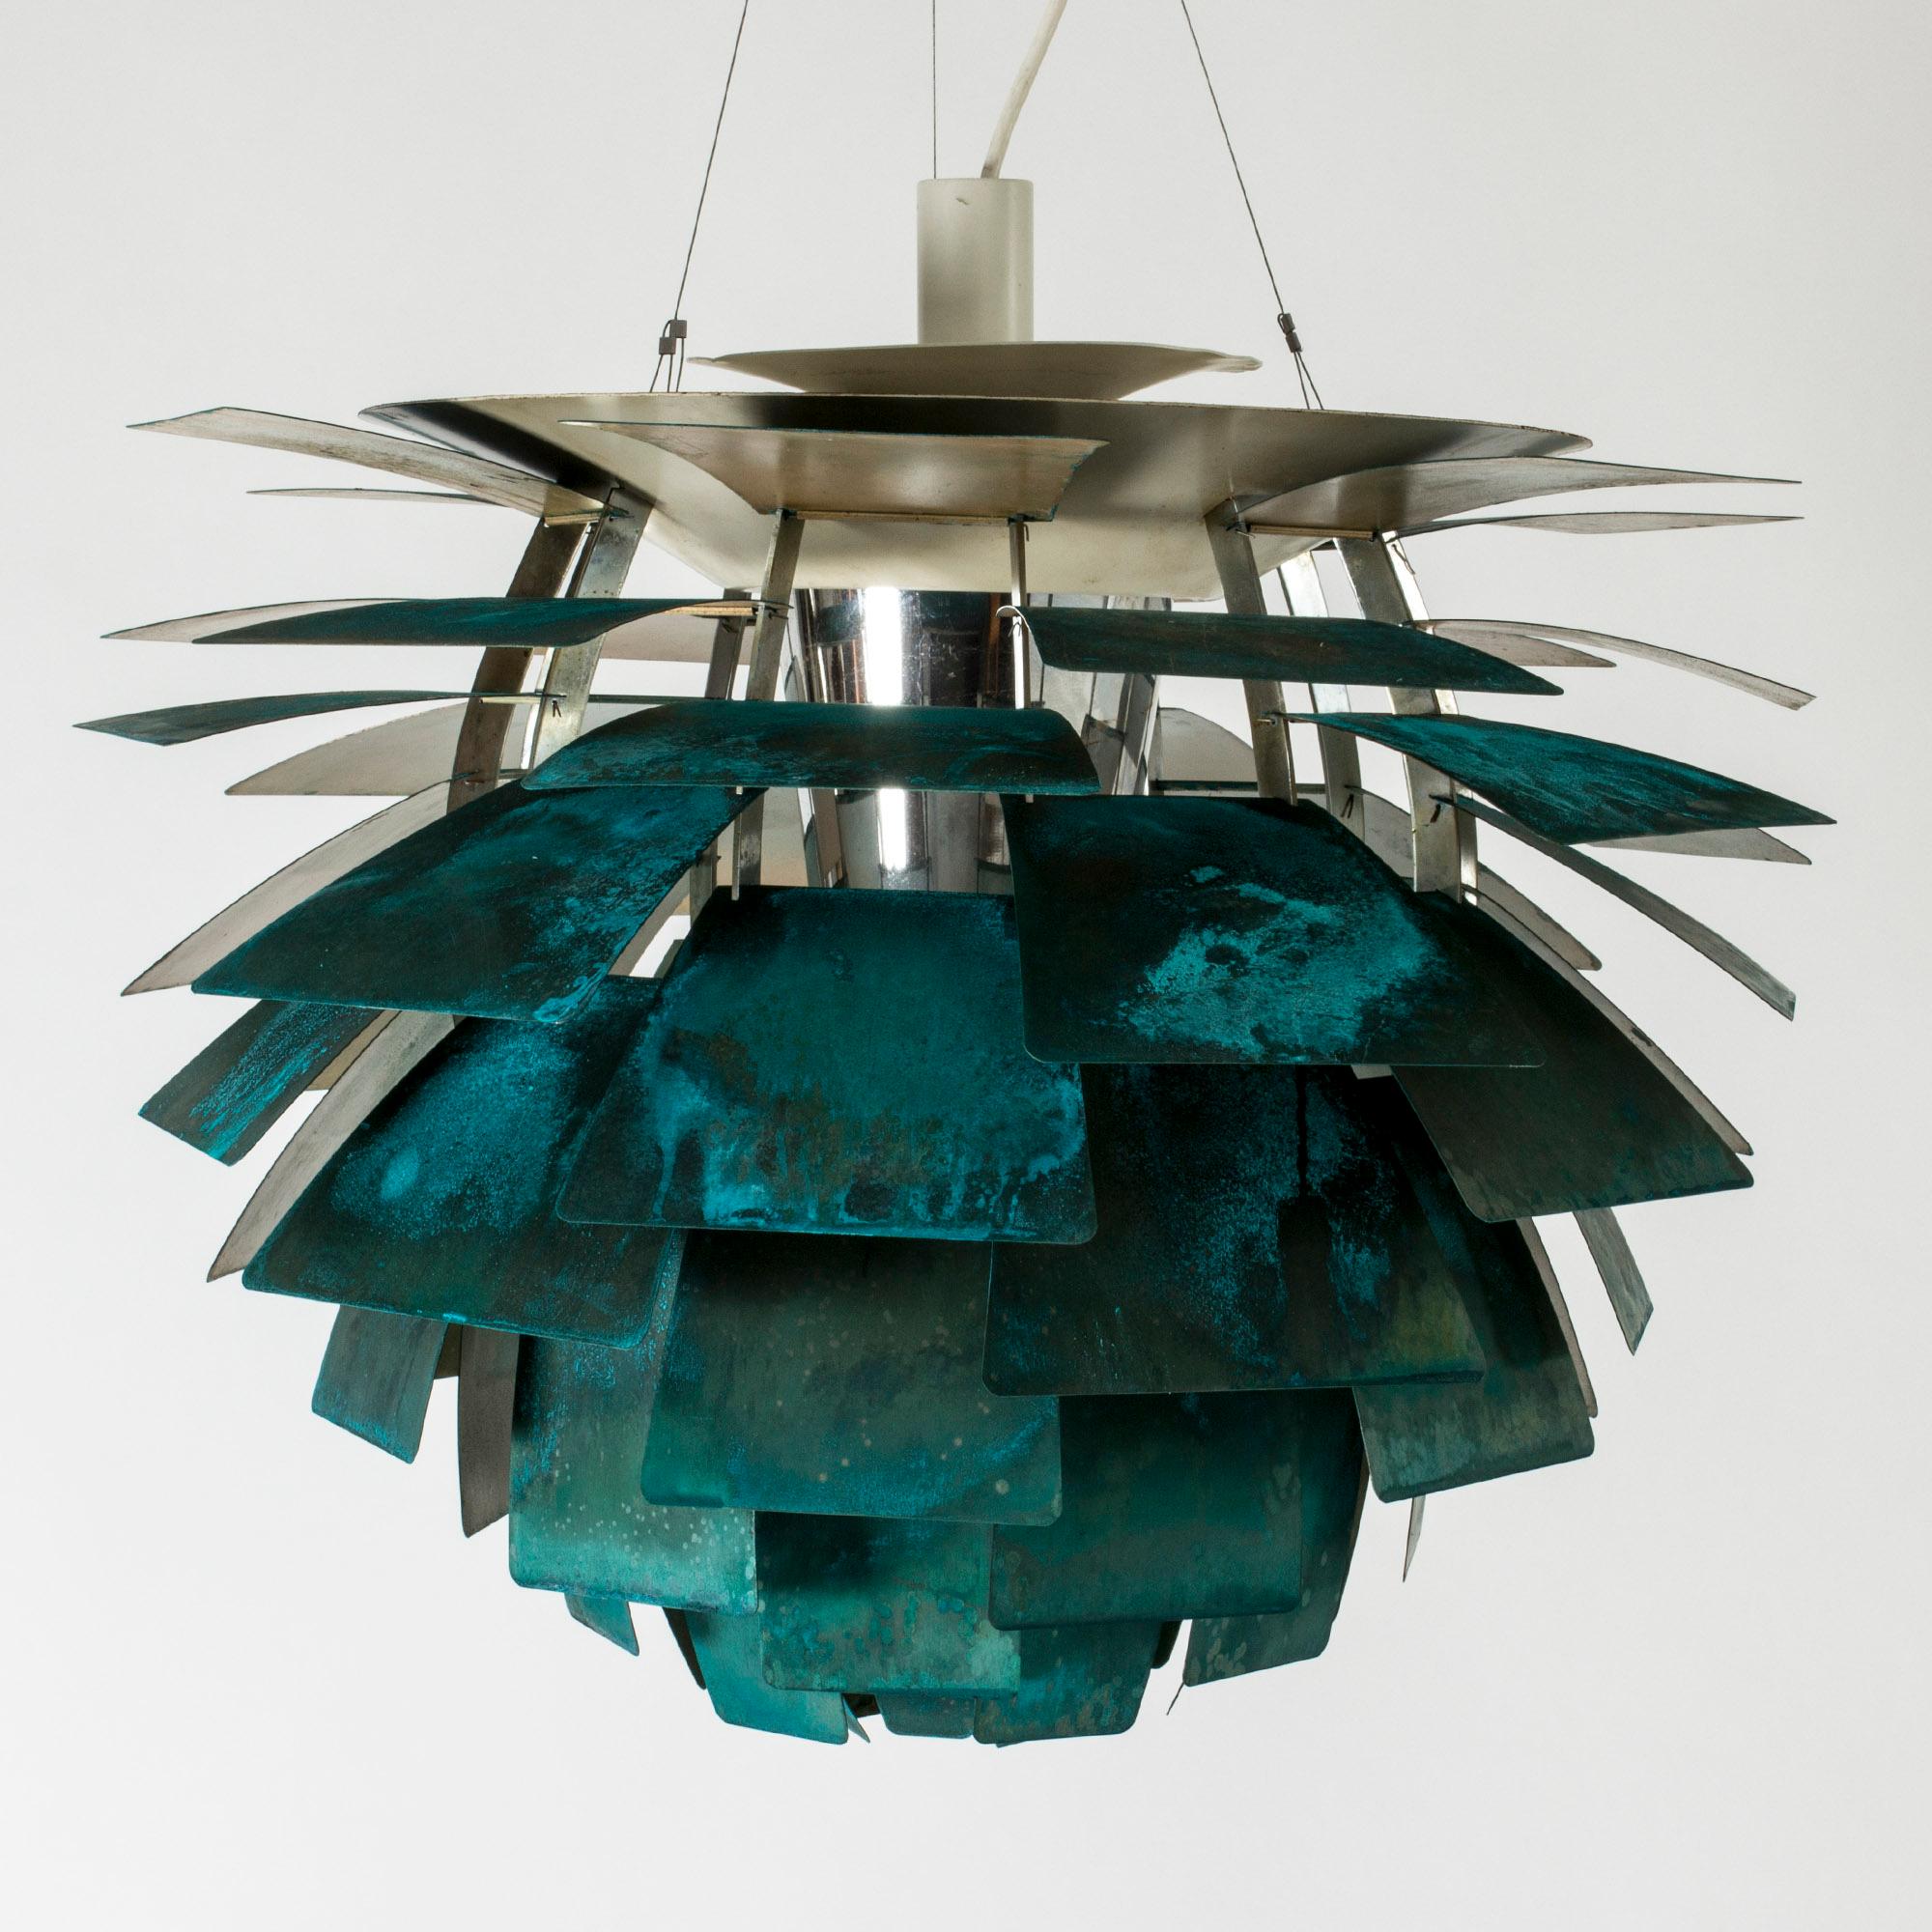 Striking “Kotten” or “Artichoke” pendant light by Poul Henningsen, made from copper. The copper is beautifully patinated in a vibrant verdigris green, with varying nuances. The ingenious design from 1958 lets light out in a fascinating way and this